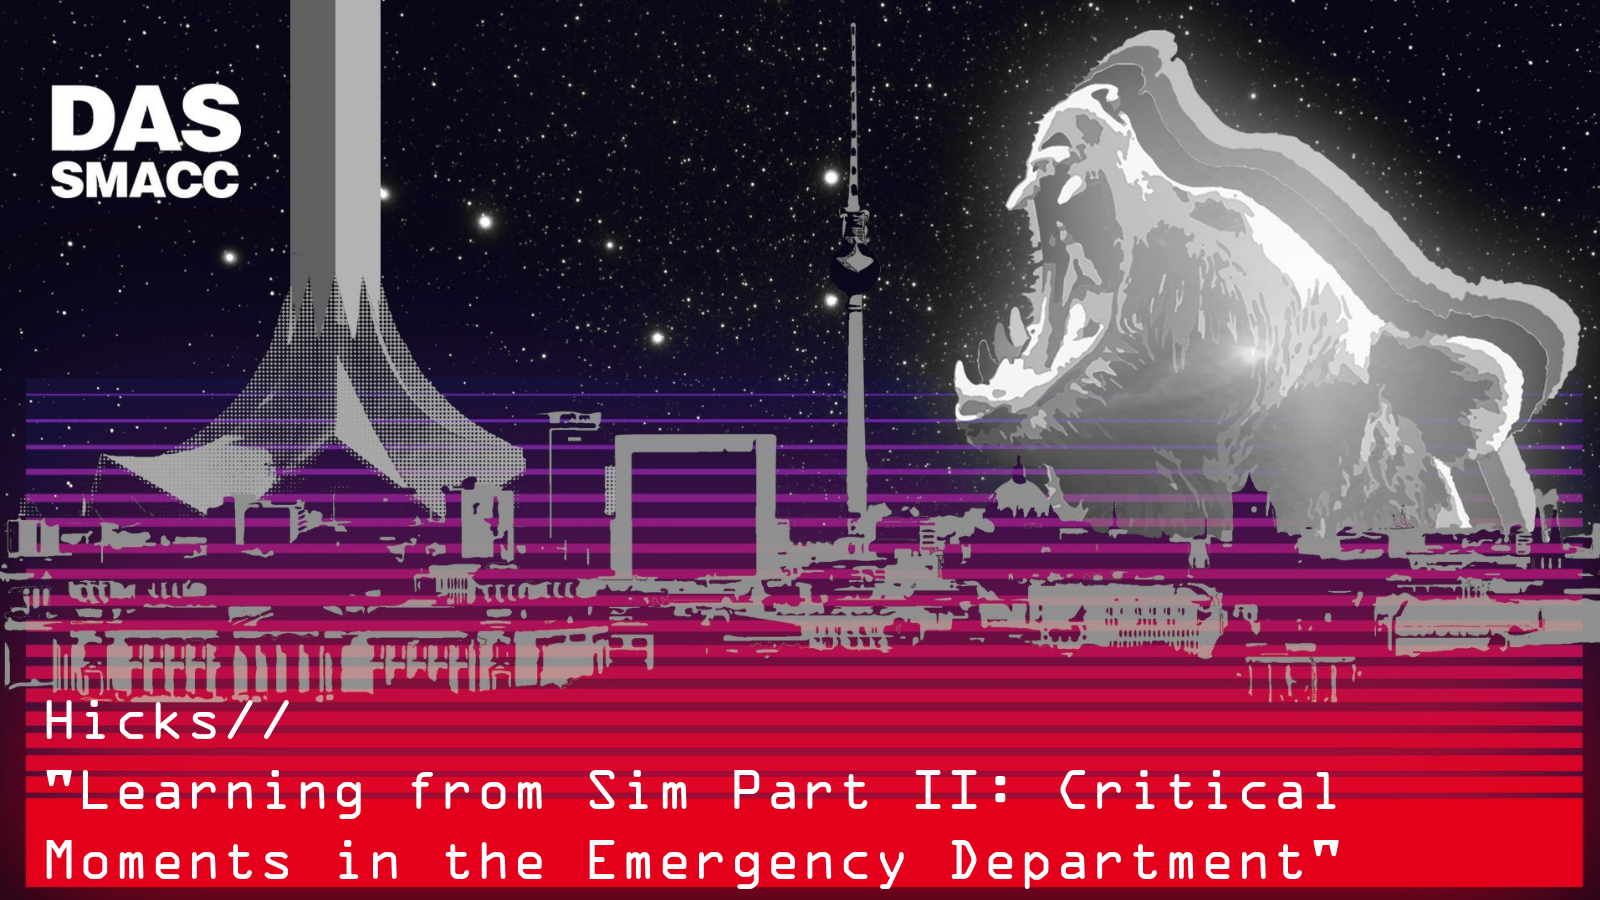 Learning from Sim Part II: Critical Moments in the Emergency Department